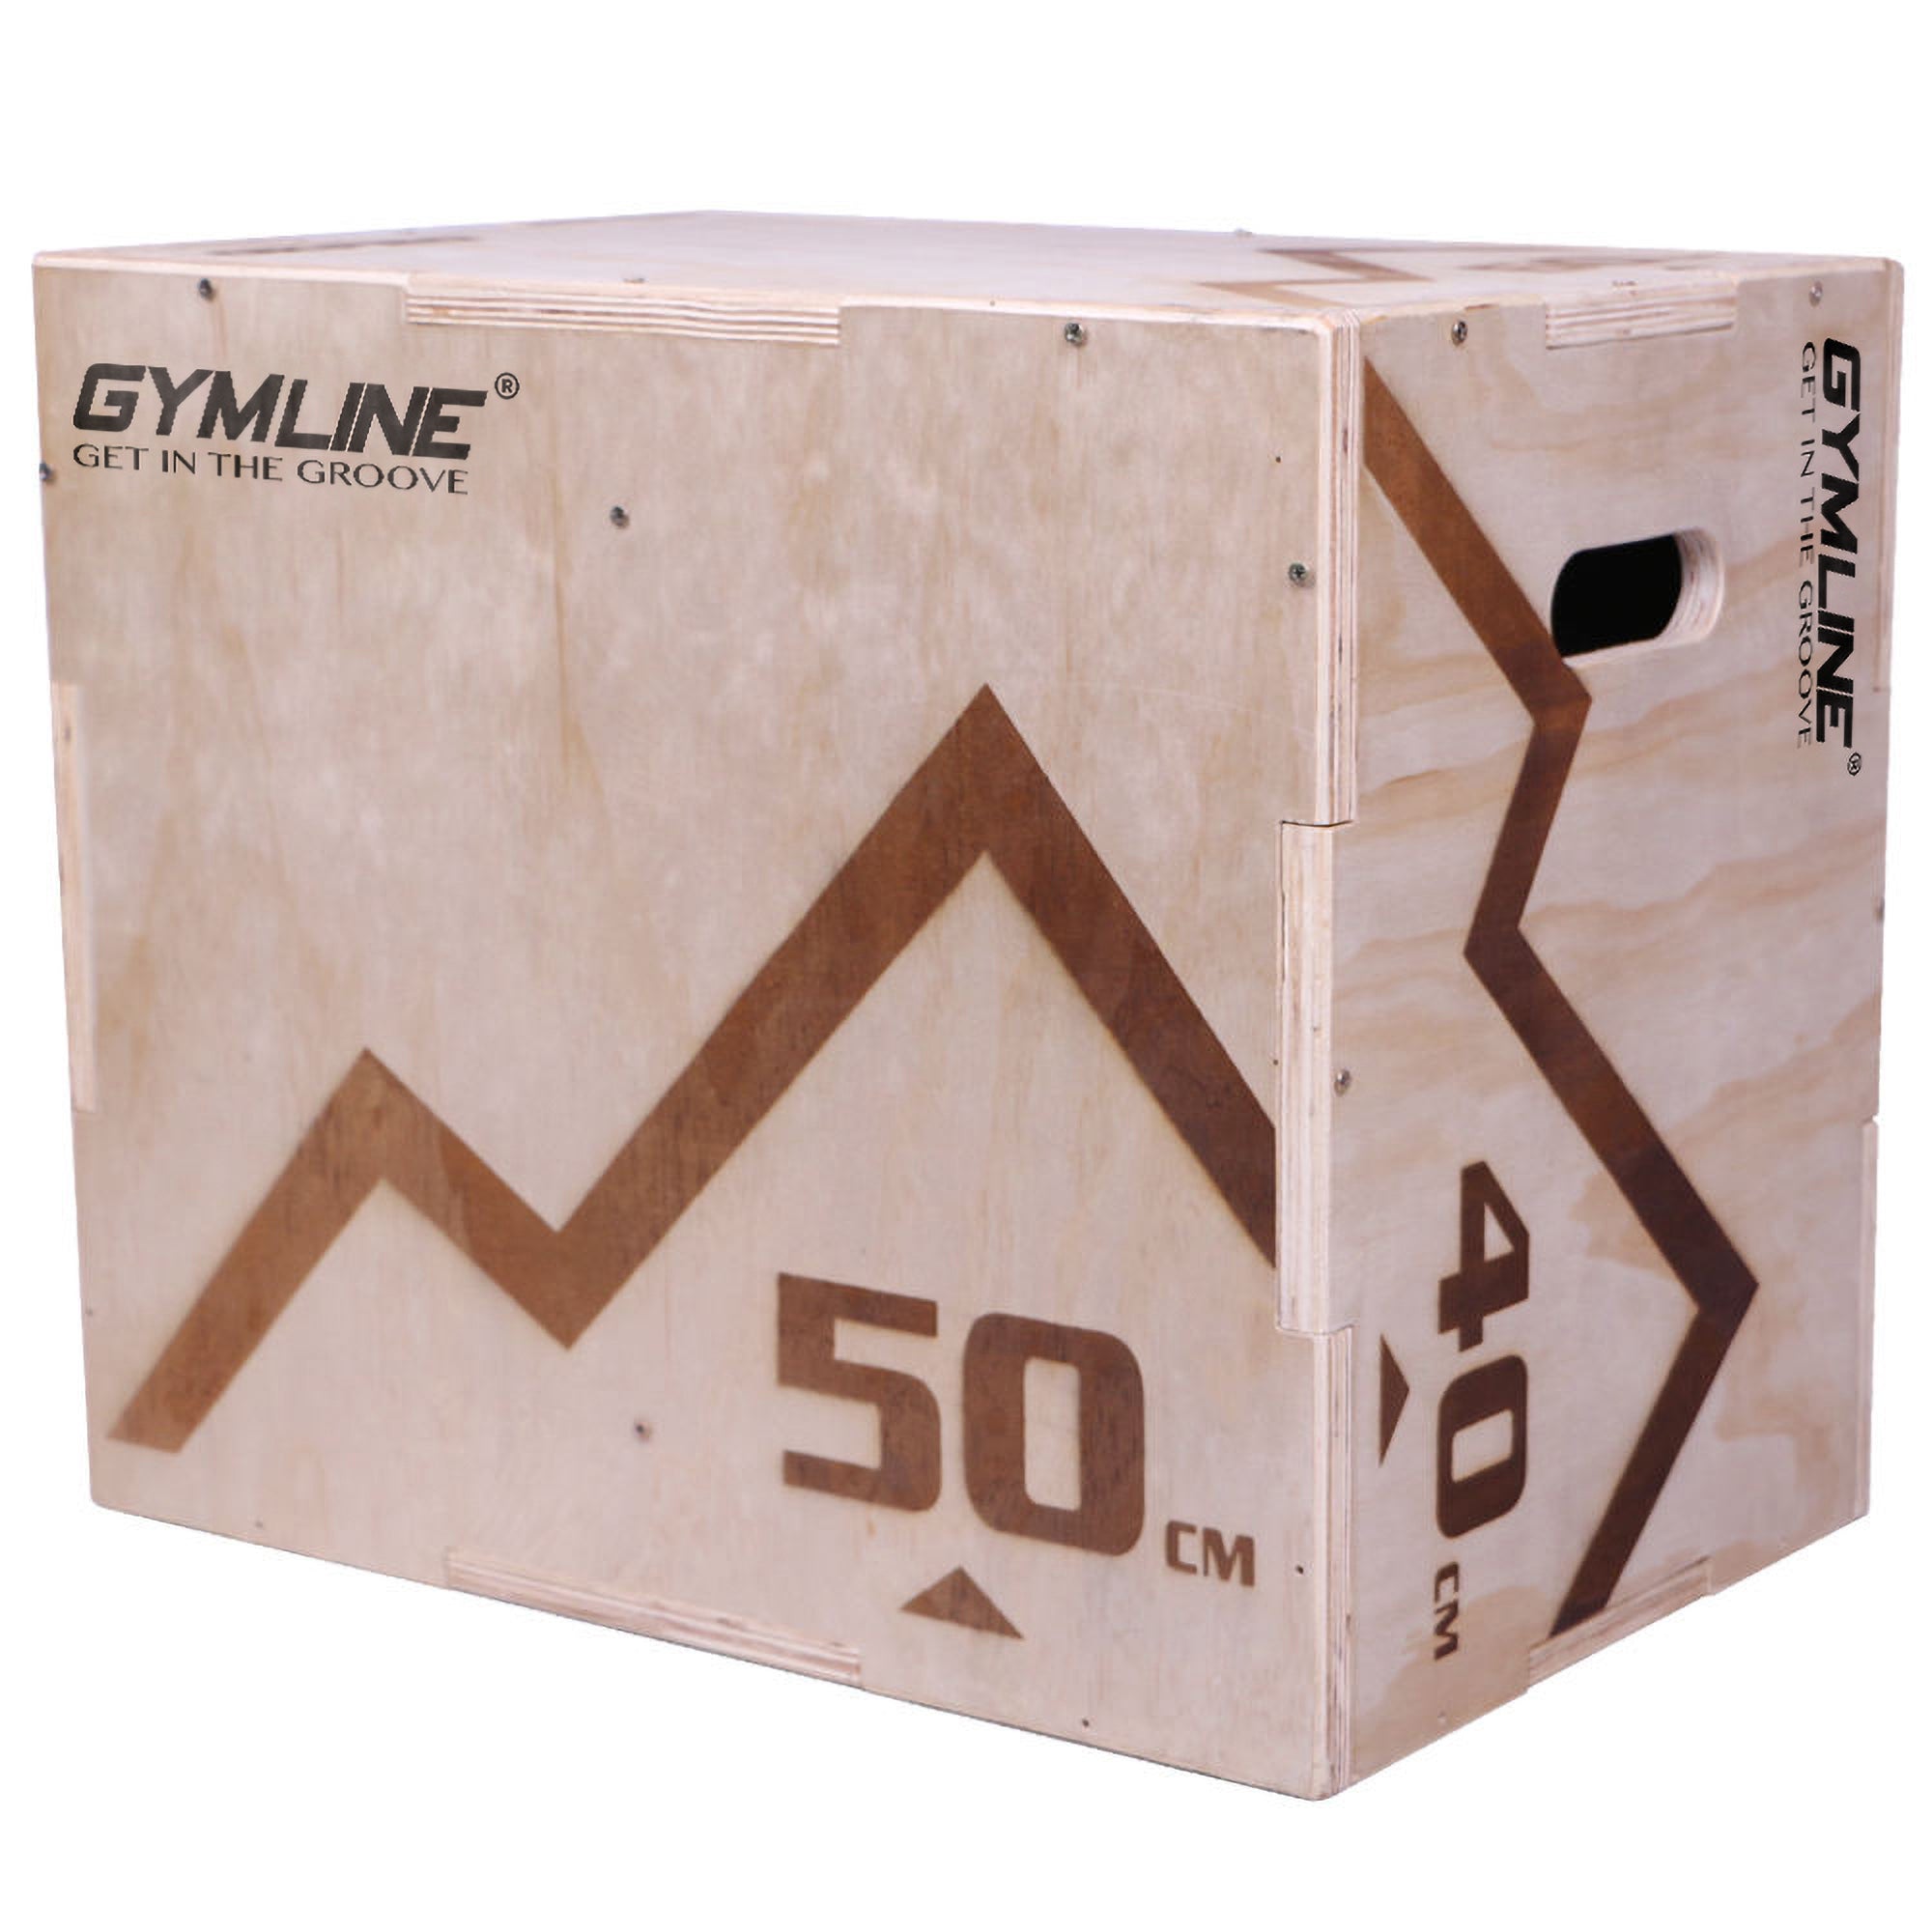 GYMLINE Wooden Jump Plyo Box for Fitness, Exercise, Strength Trainer || Enhance Muscle Power and Agility || Ideal for Crossfit & Functional Training || Jump Plyo Box for Gym